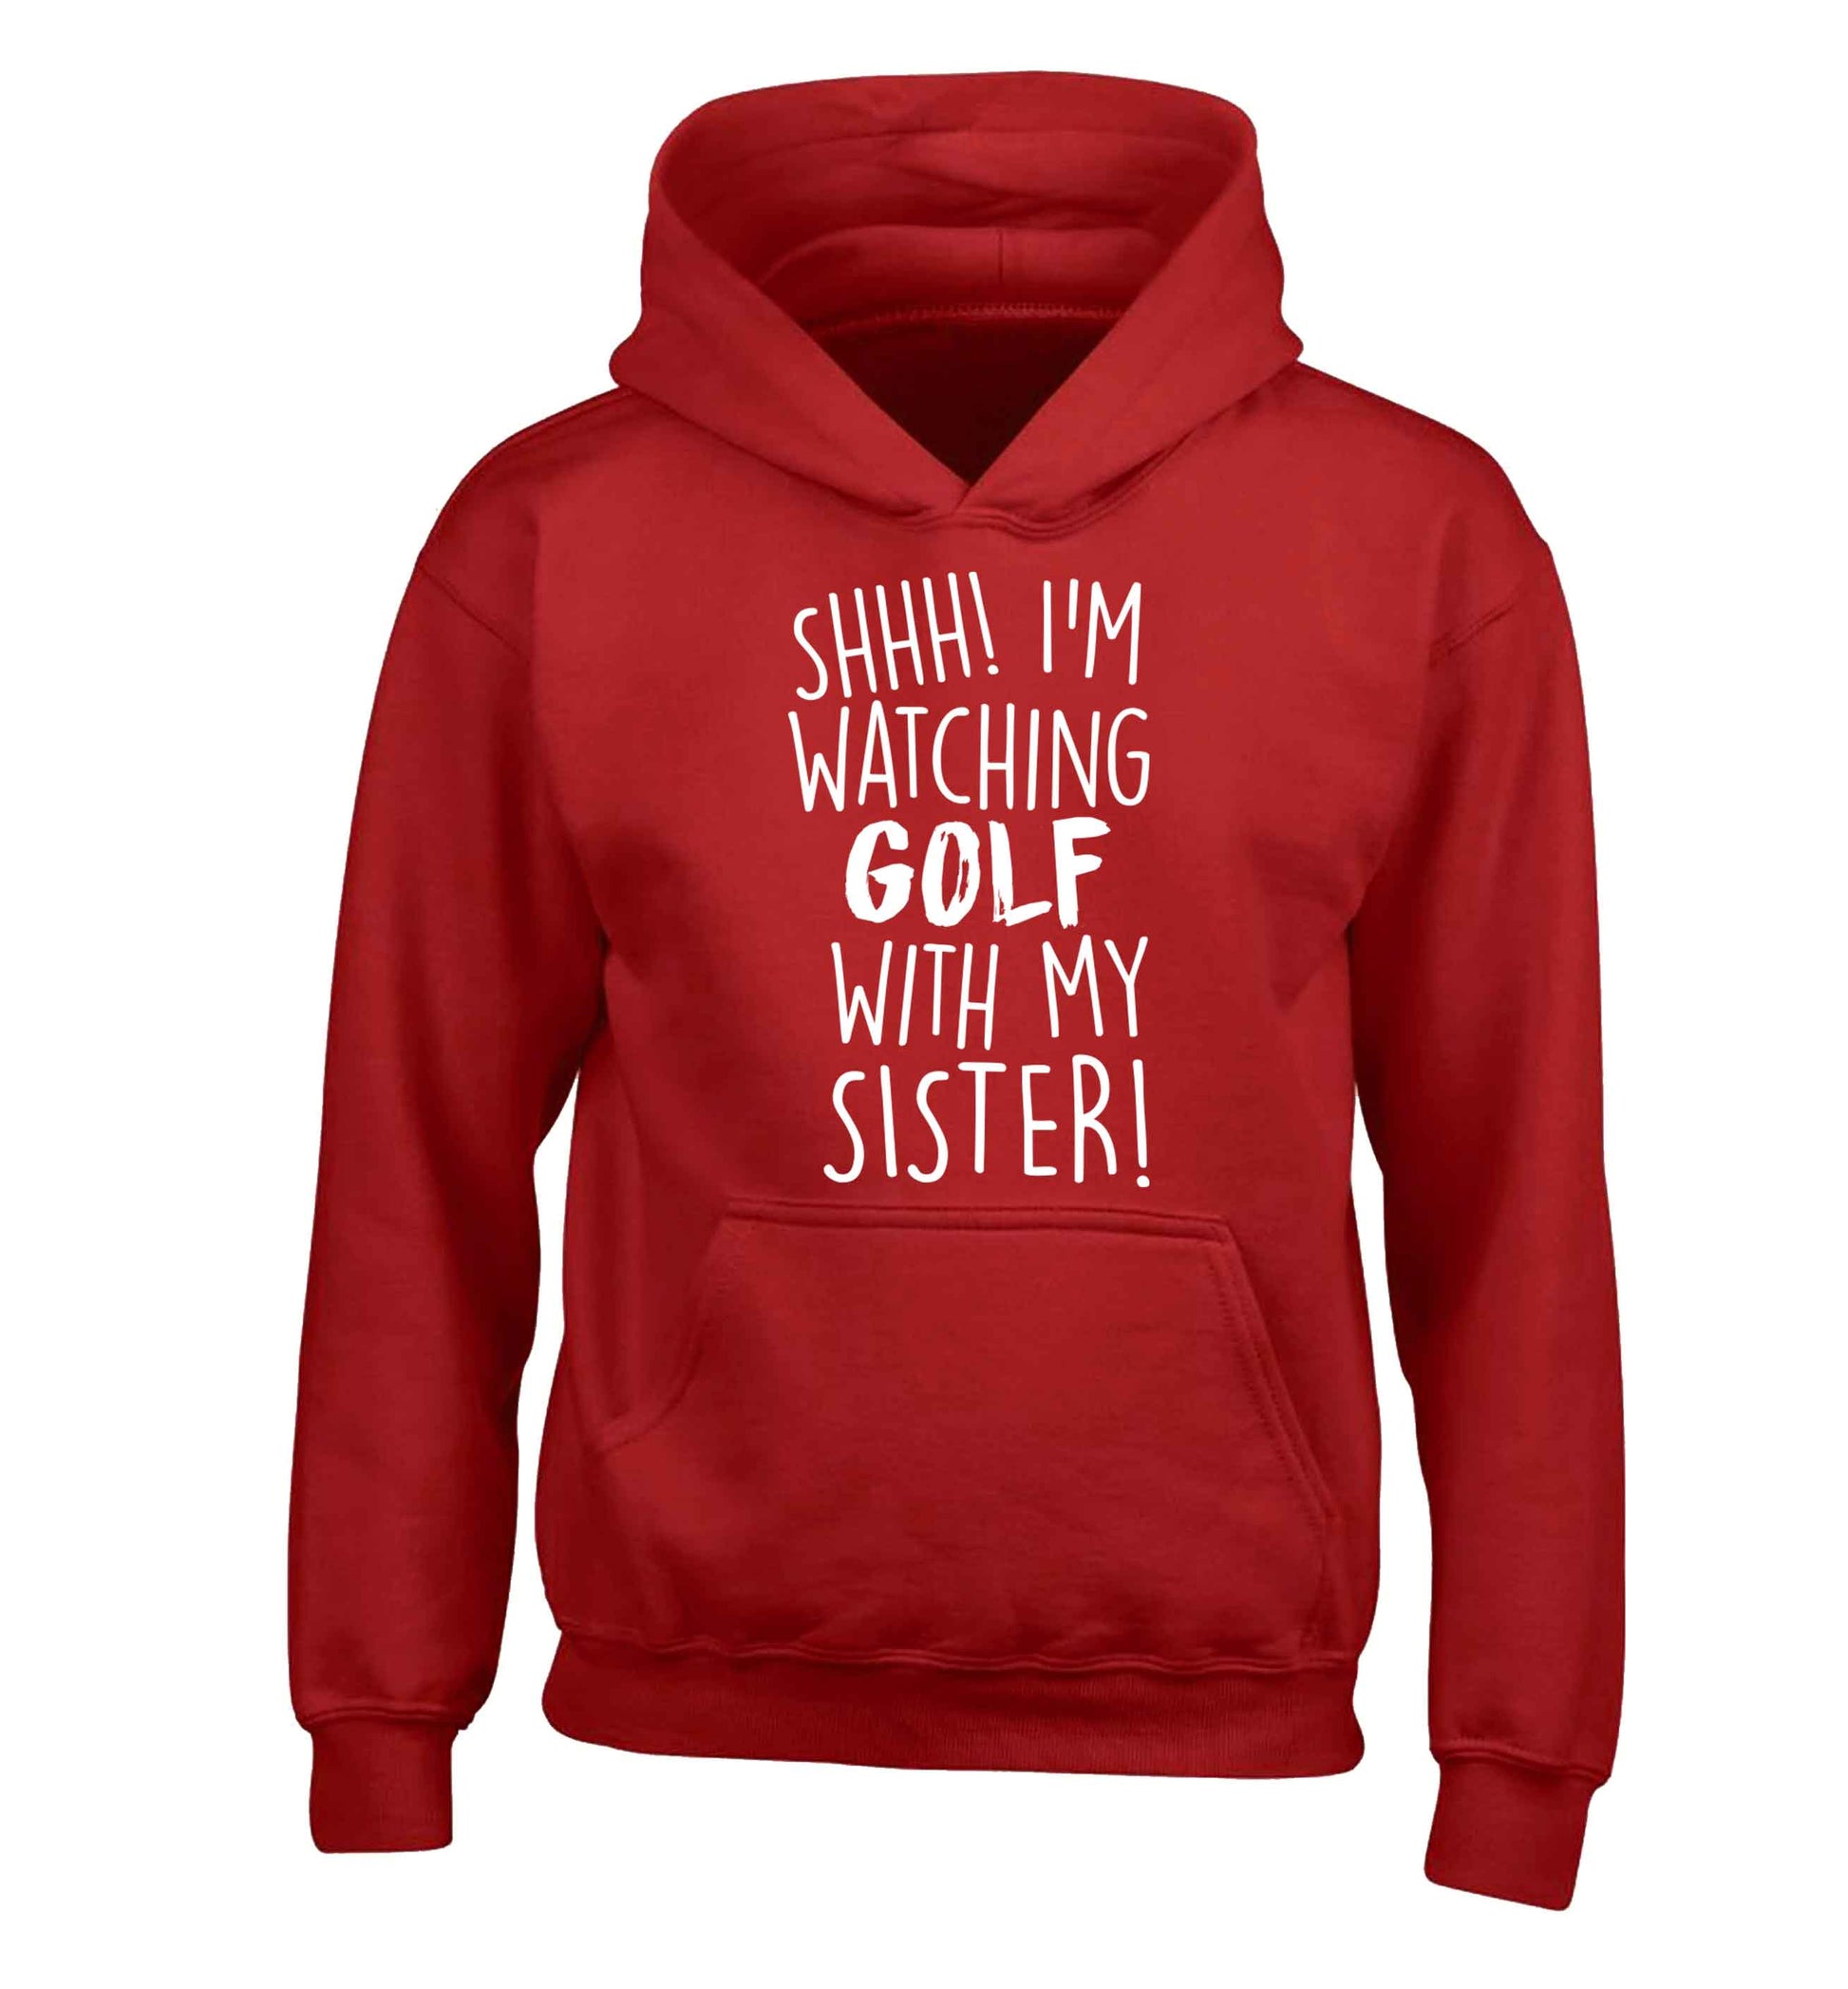 Shh I'm watching golf with my sister children's red hoodie 12-13 Years